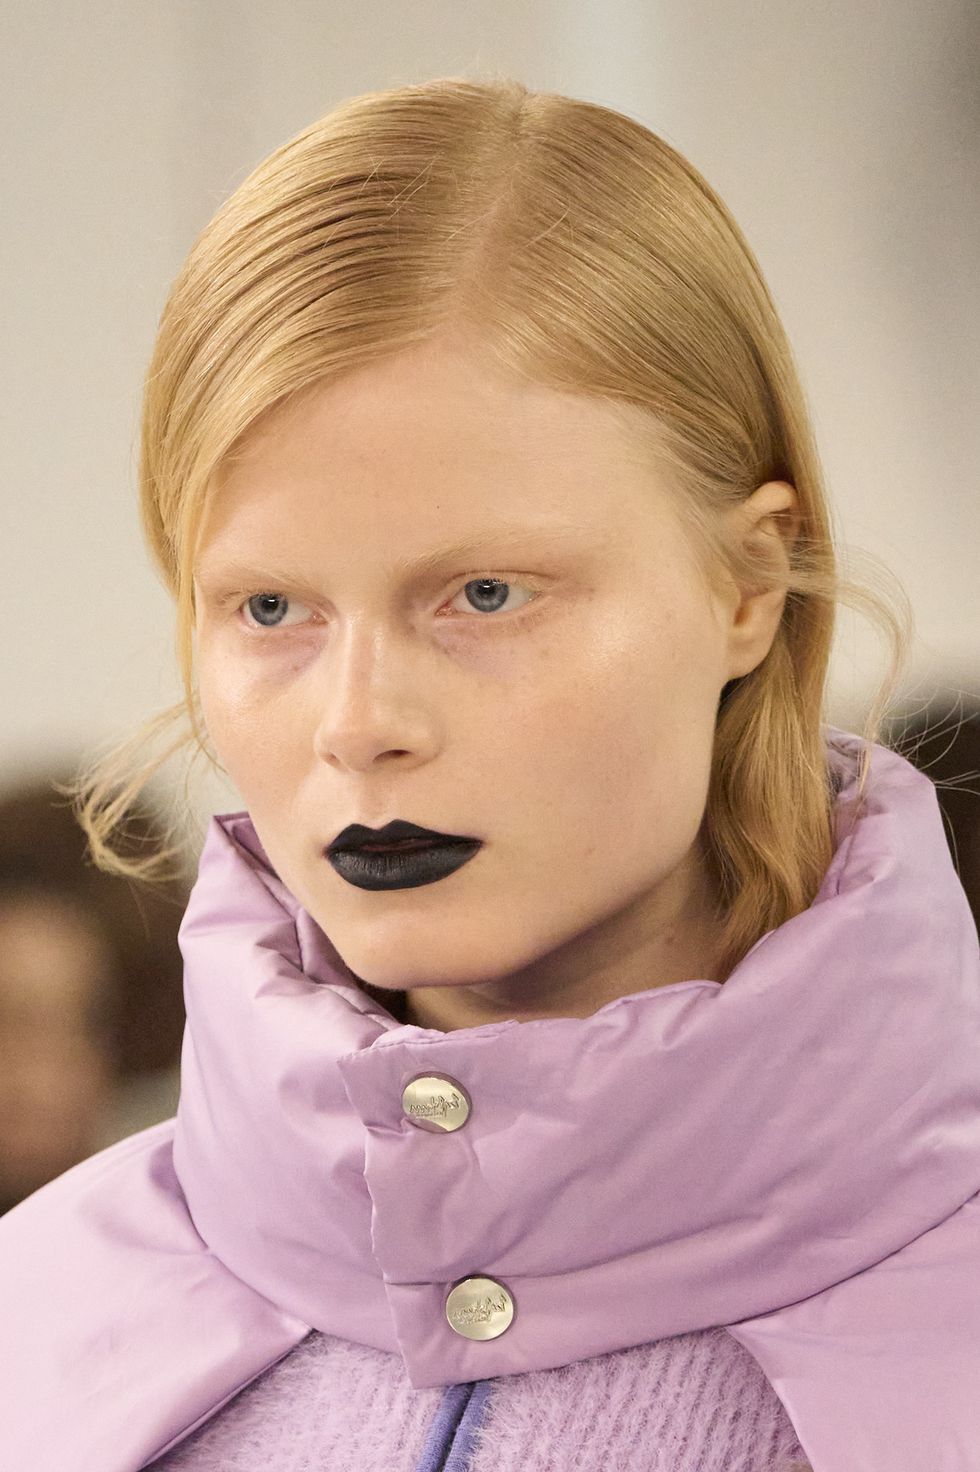 The Beauty Trends The Pros Are Obsessed With for Fall-Winter 2023